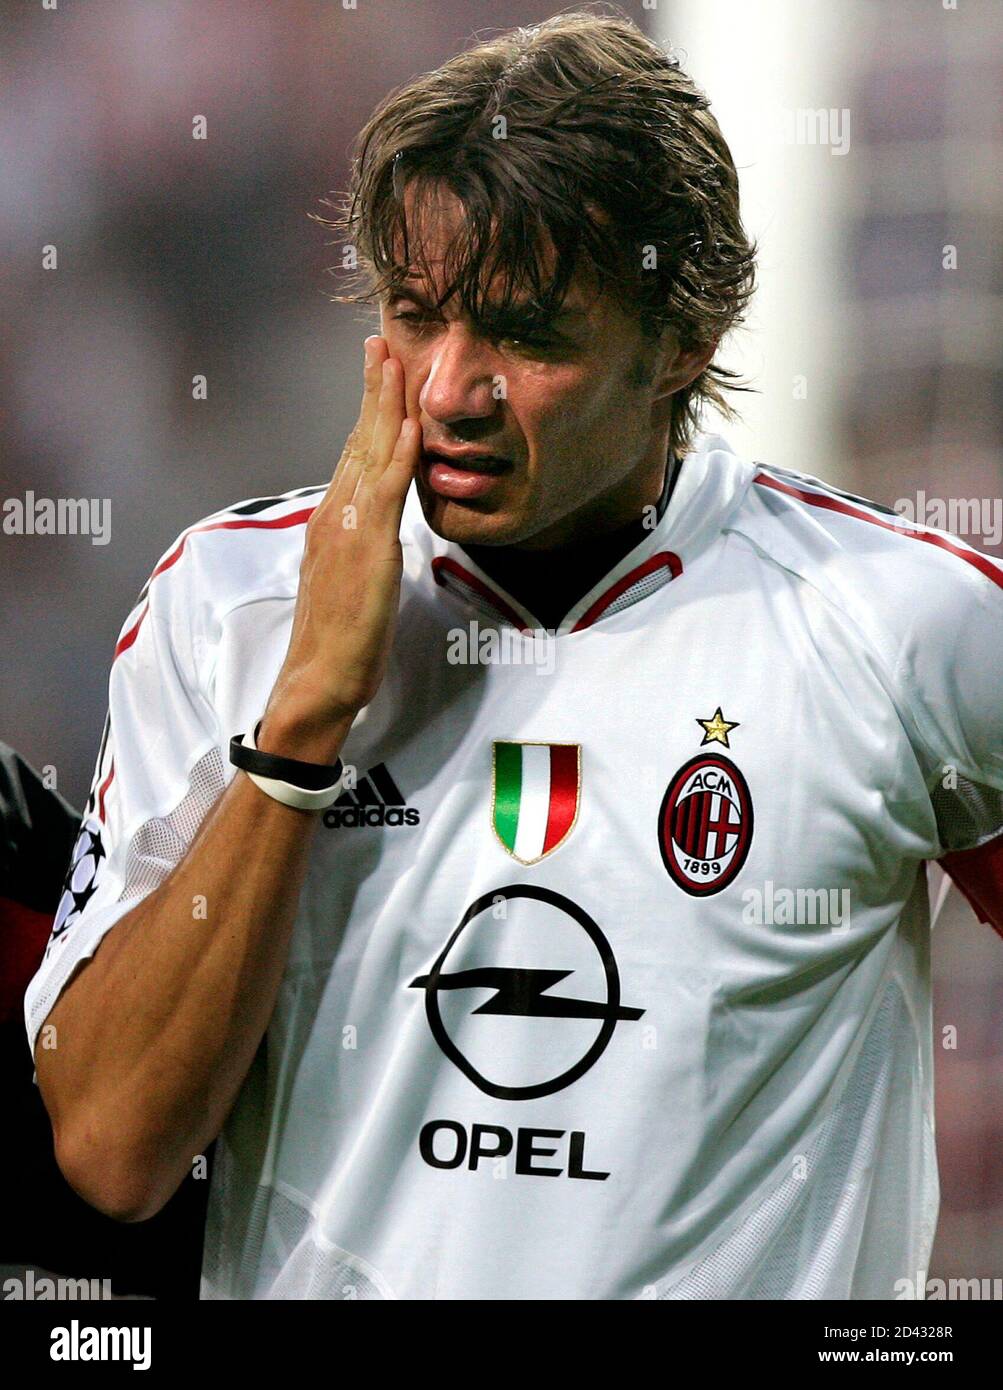 ac-milans-captain-maldini-holds-his-face-during-the-champions-league-semi-final-second-leg-soccer-match-against-psv-eindhoven-in-eindhoven-ac-milans-captain-paolo-maldini-holds-his-face-during-the-champions-league-semi-final-second-leg-soccer-match-against-psv-eindhoven-at-the-phillips-stadium-in-eindhoven-the-netherlands-may-4-2005-reutersjerry-lampen-2D4328R.jpg